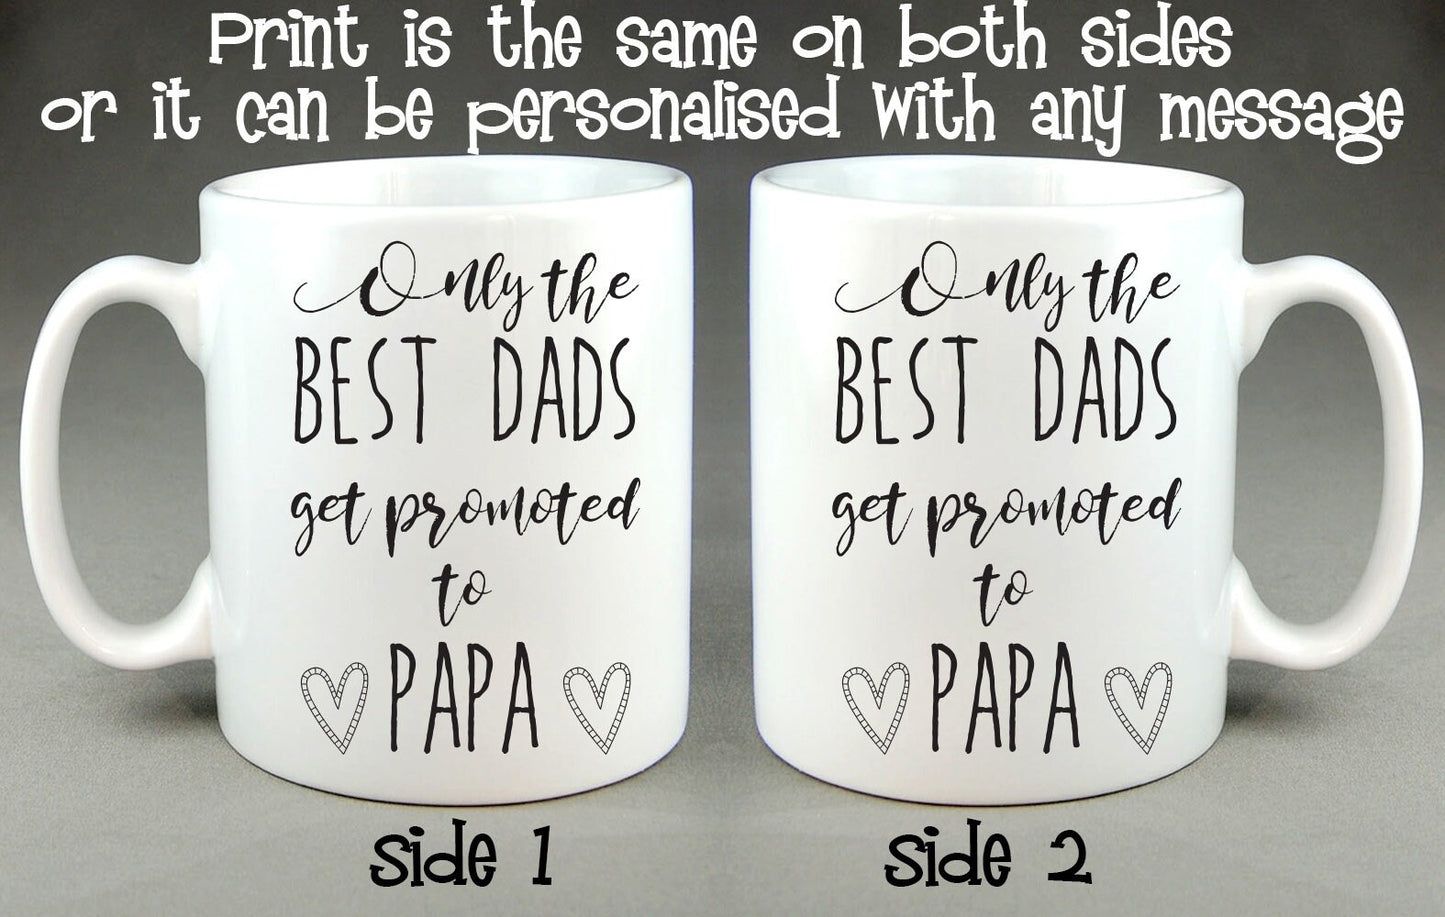 Only the Best Dads Get Promoted To Papa Mug - 10oz. cup, can be personalised